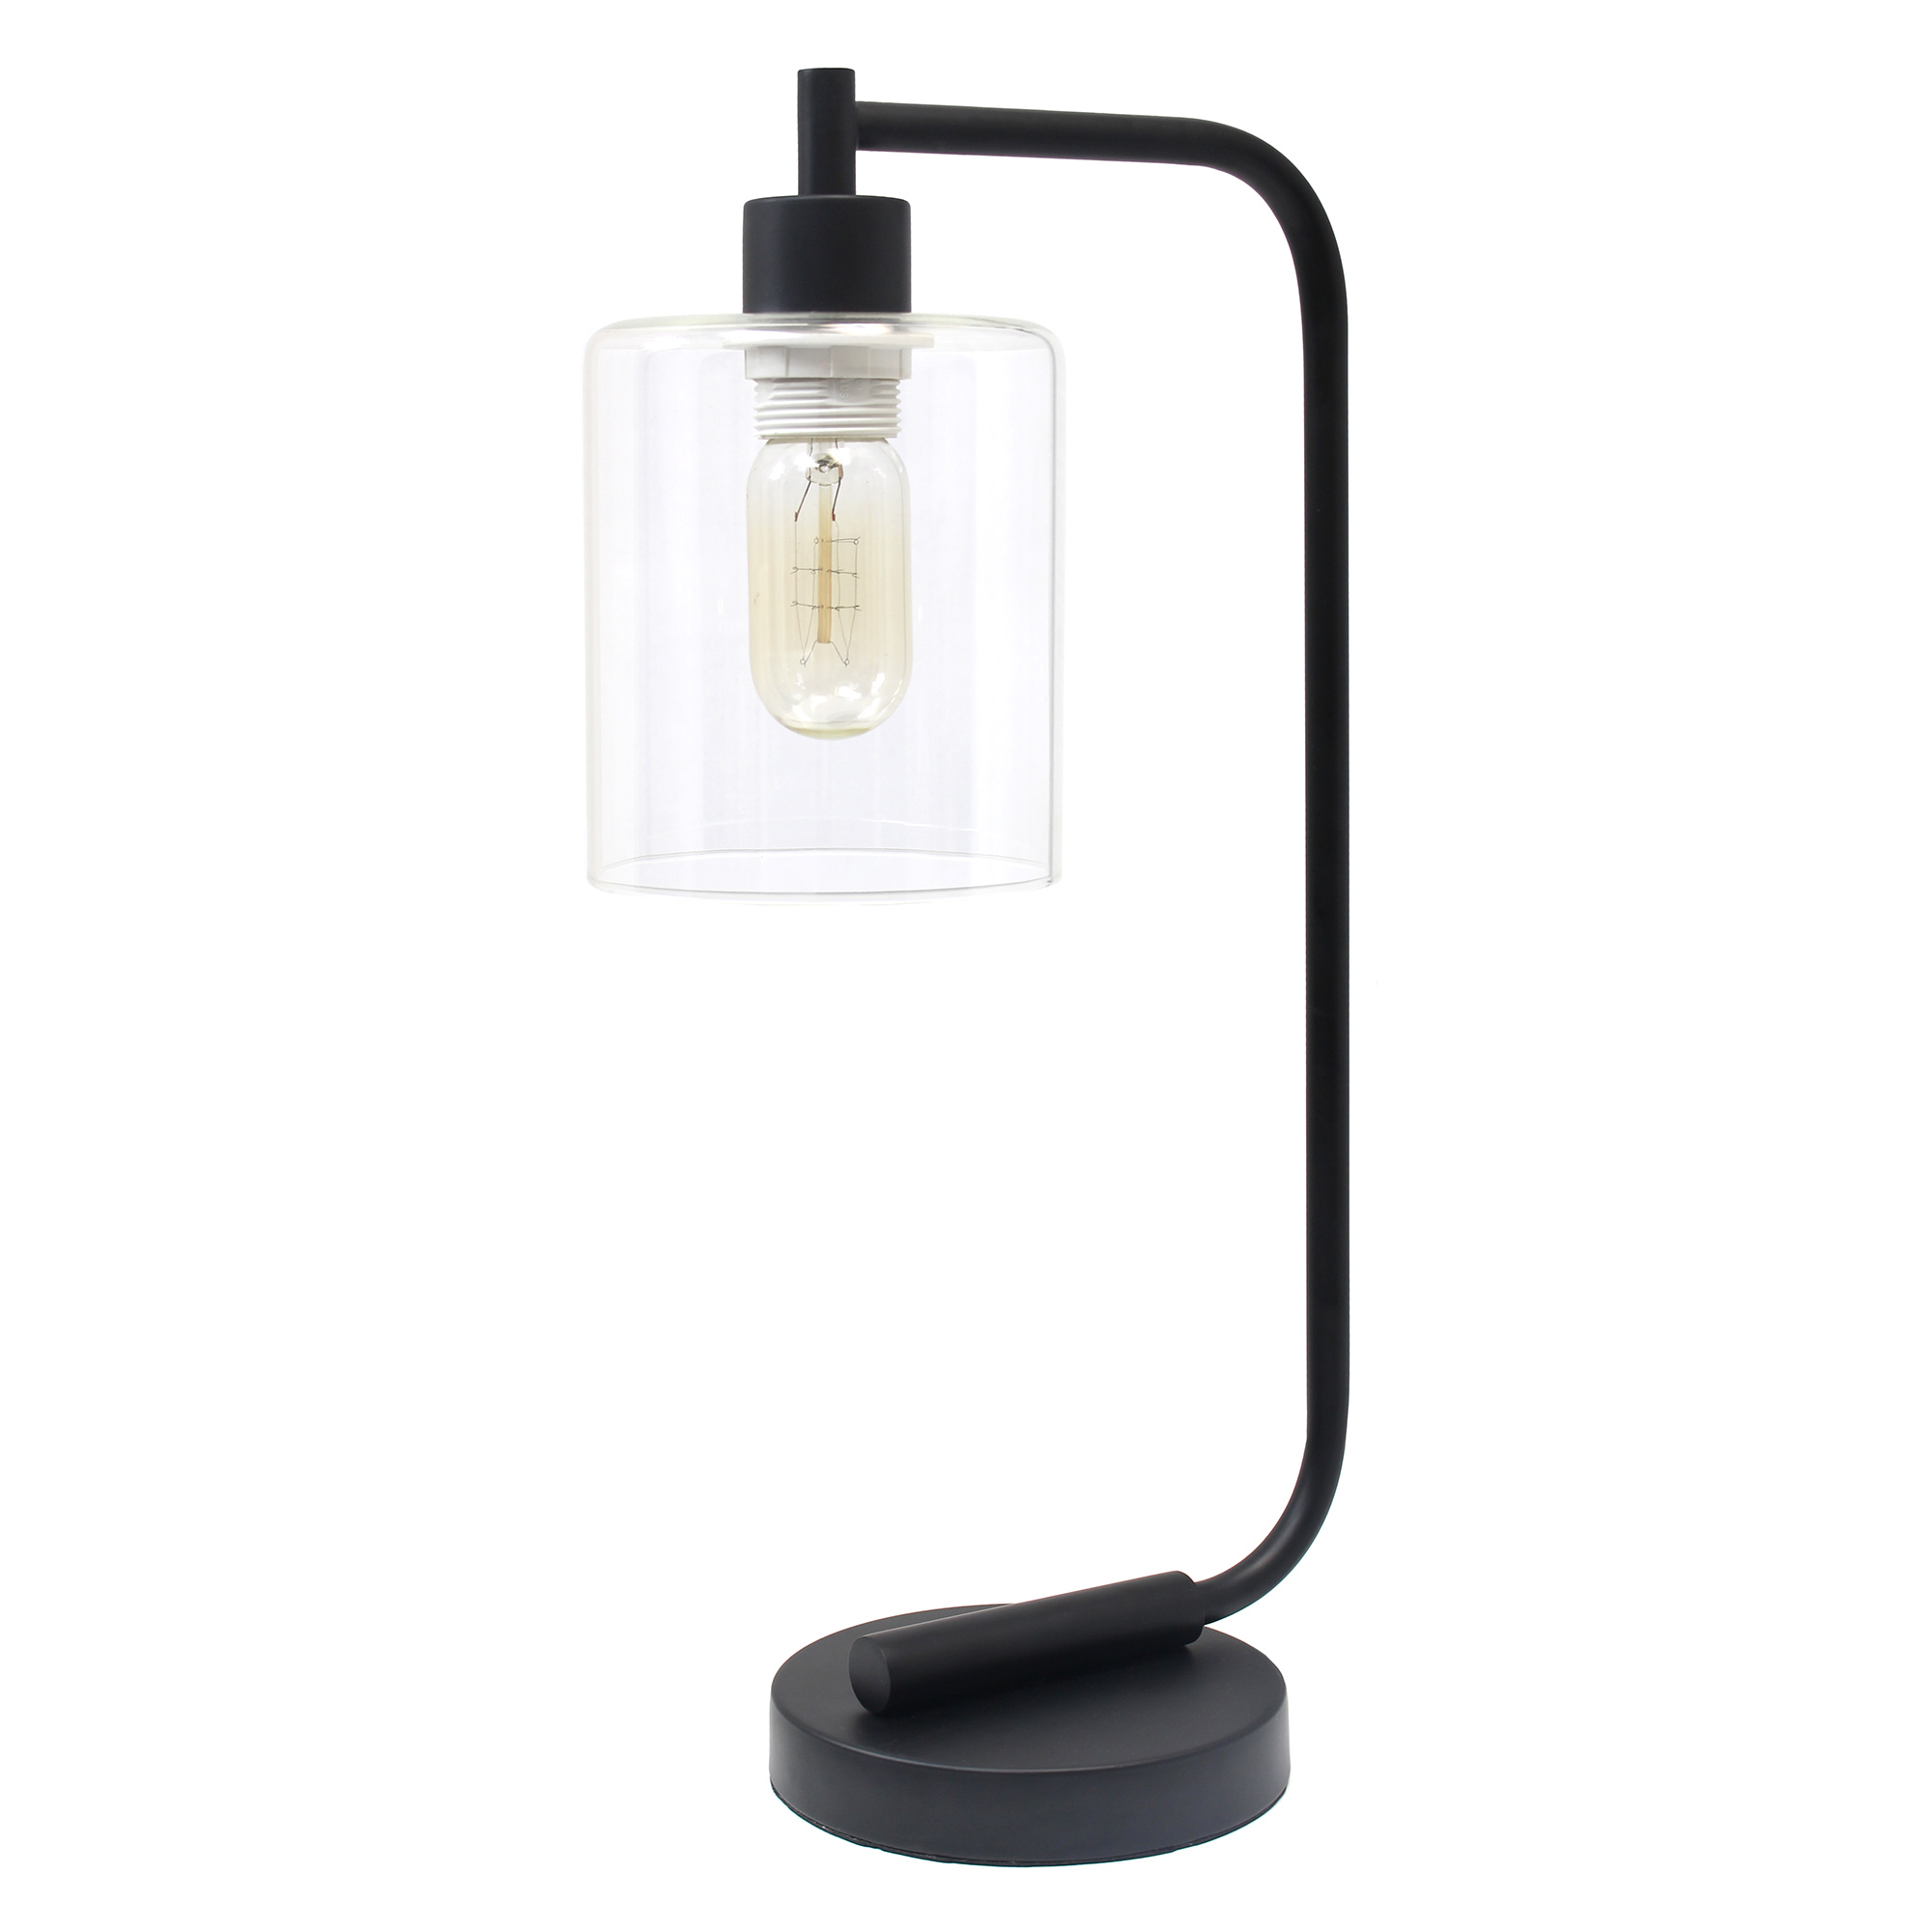 Lalia Home Modern Iron Desk Lamp with Glass Shade, Black